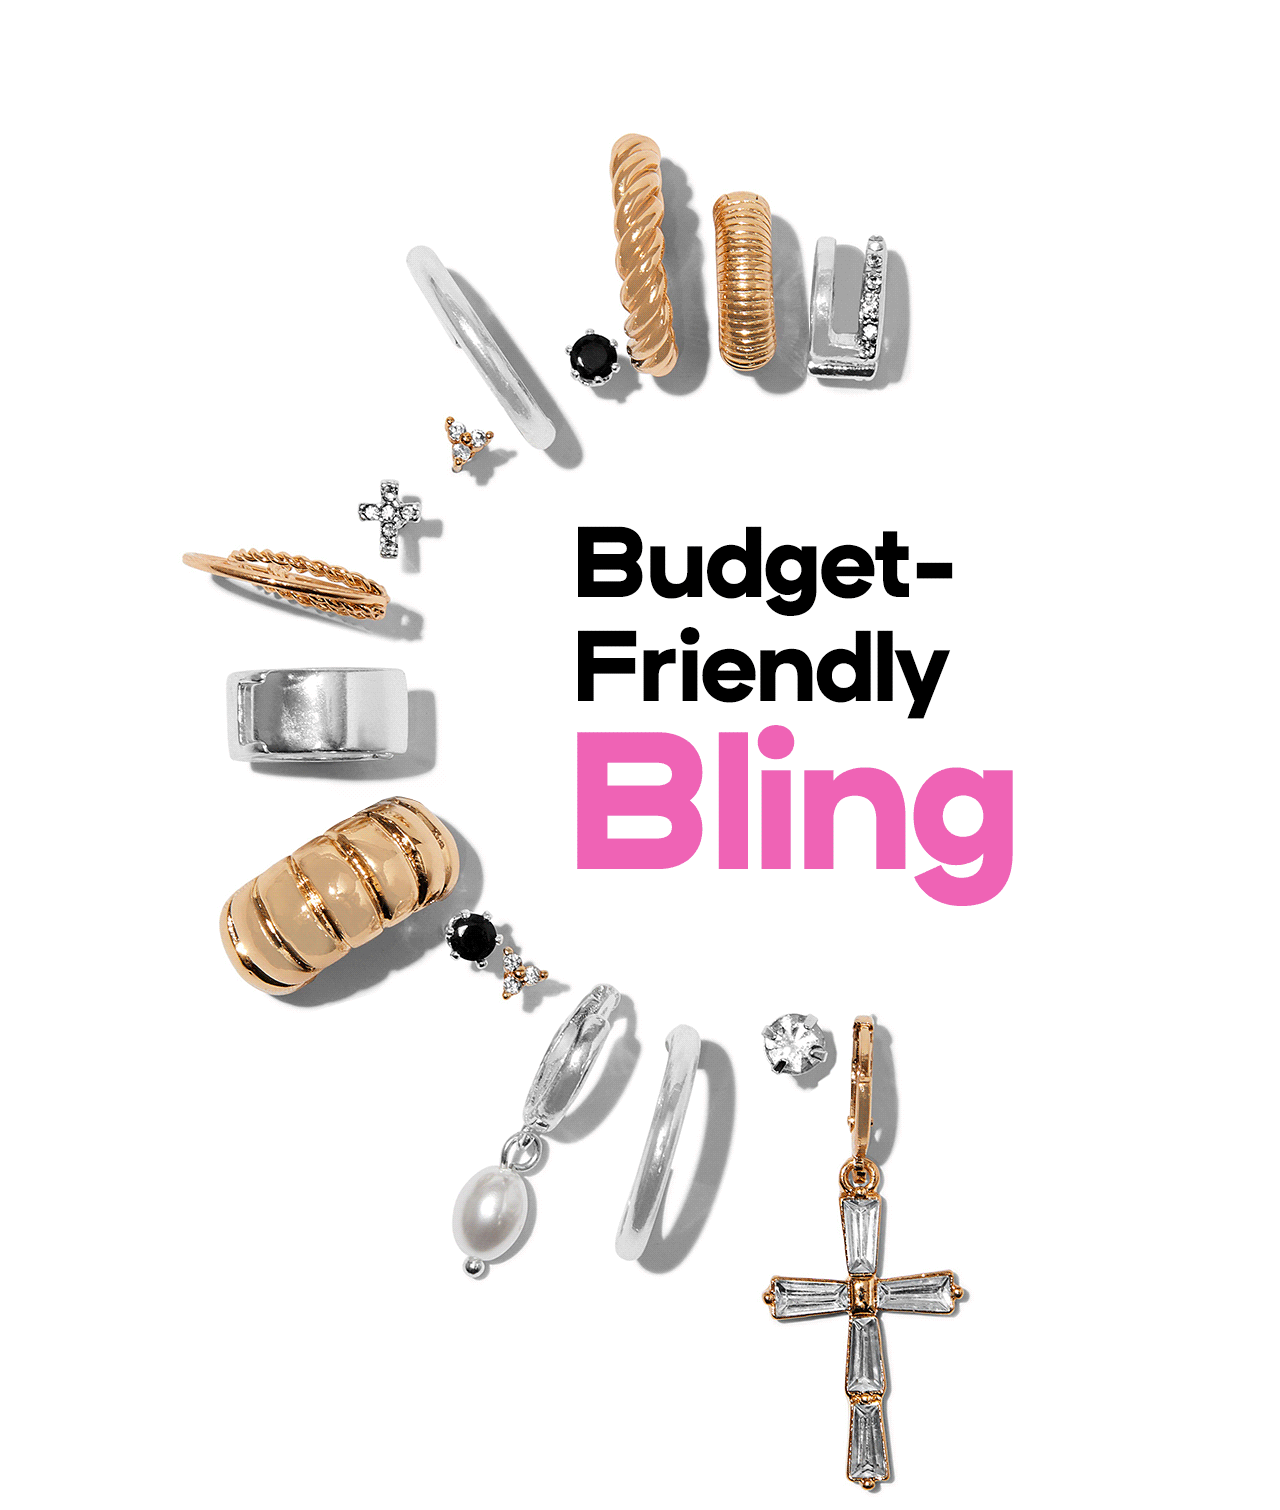 Budget-Friendly Bling